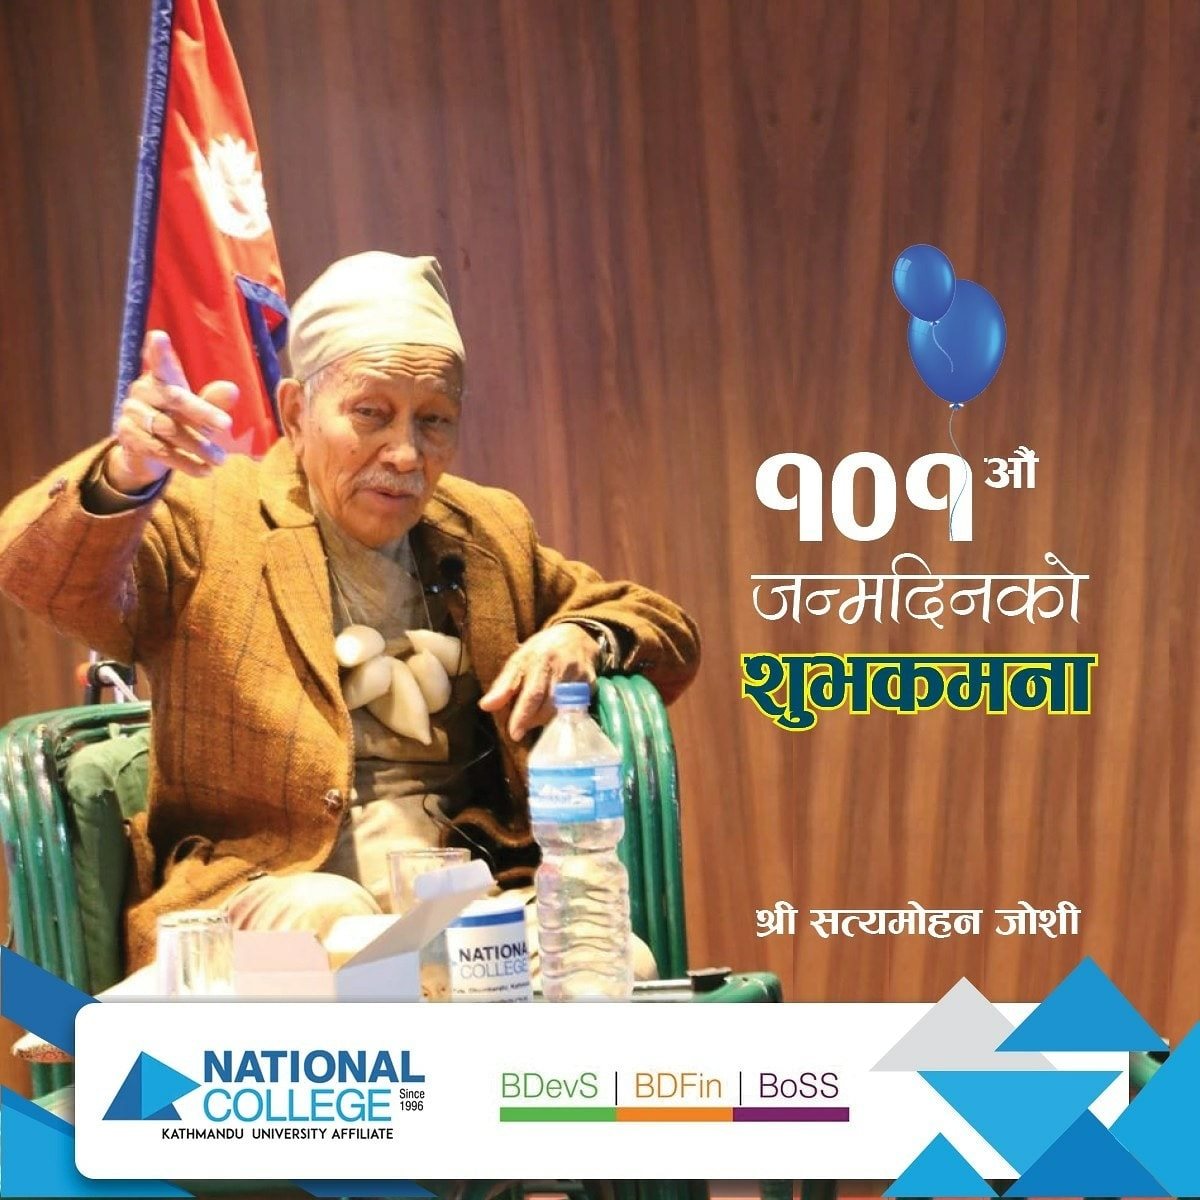 Happy 101st birthday to our respected cultural historian Mr. Satya Mohan Joshi